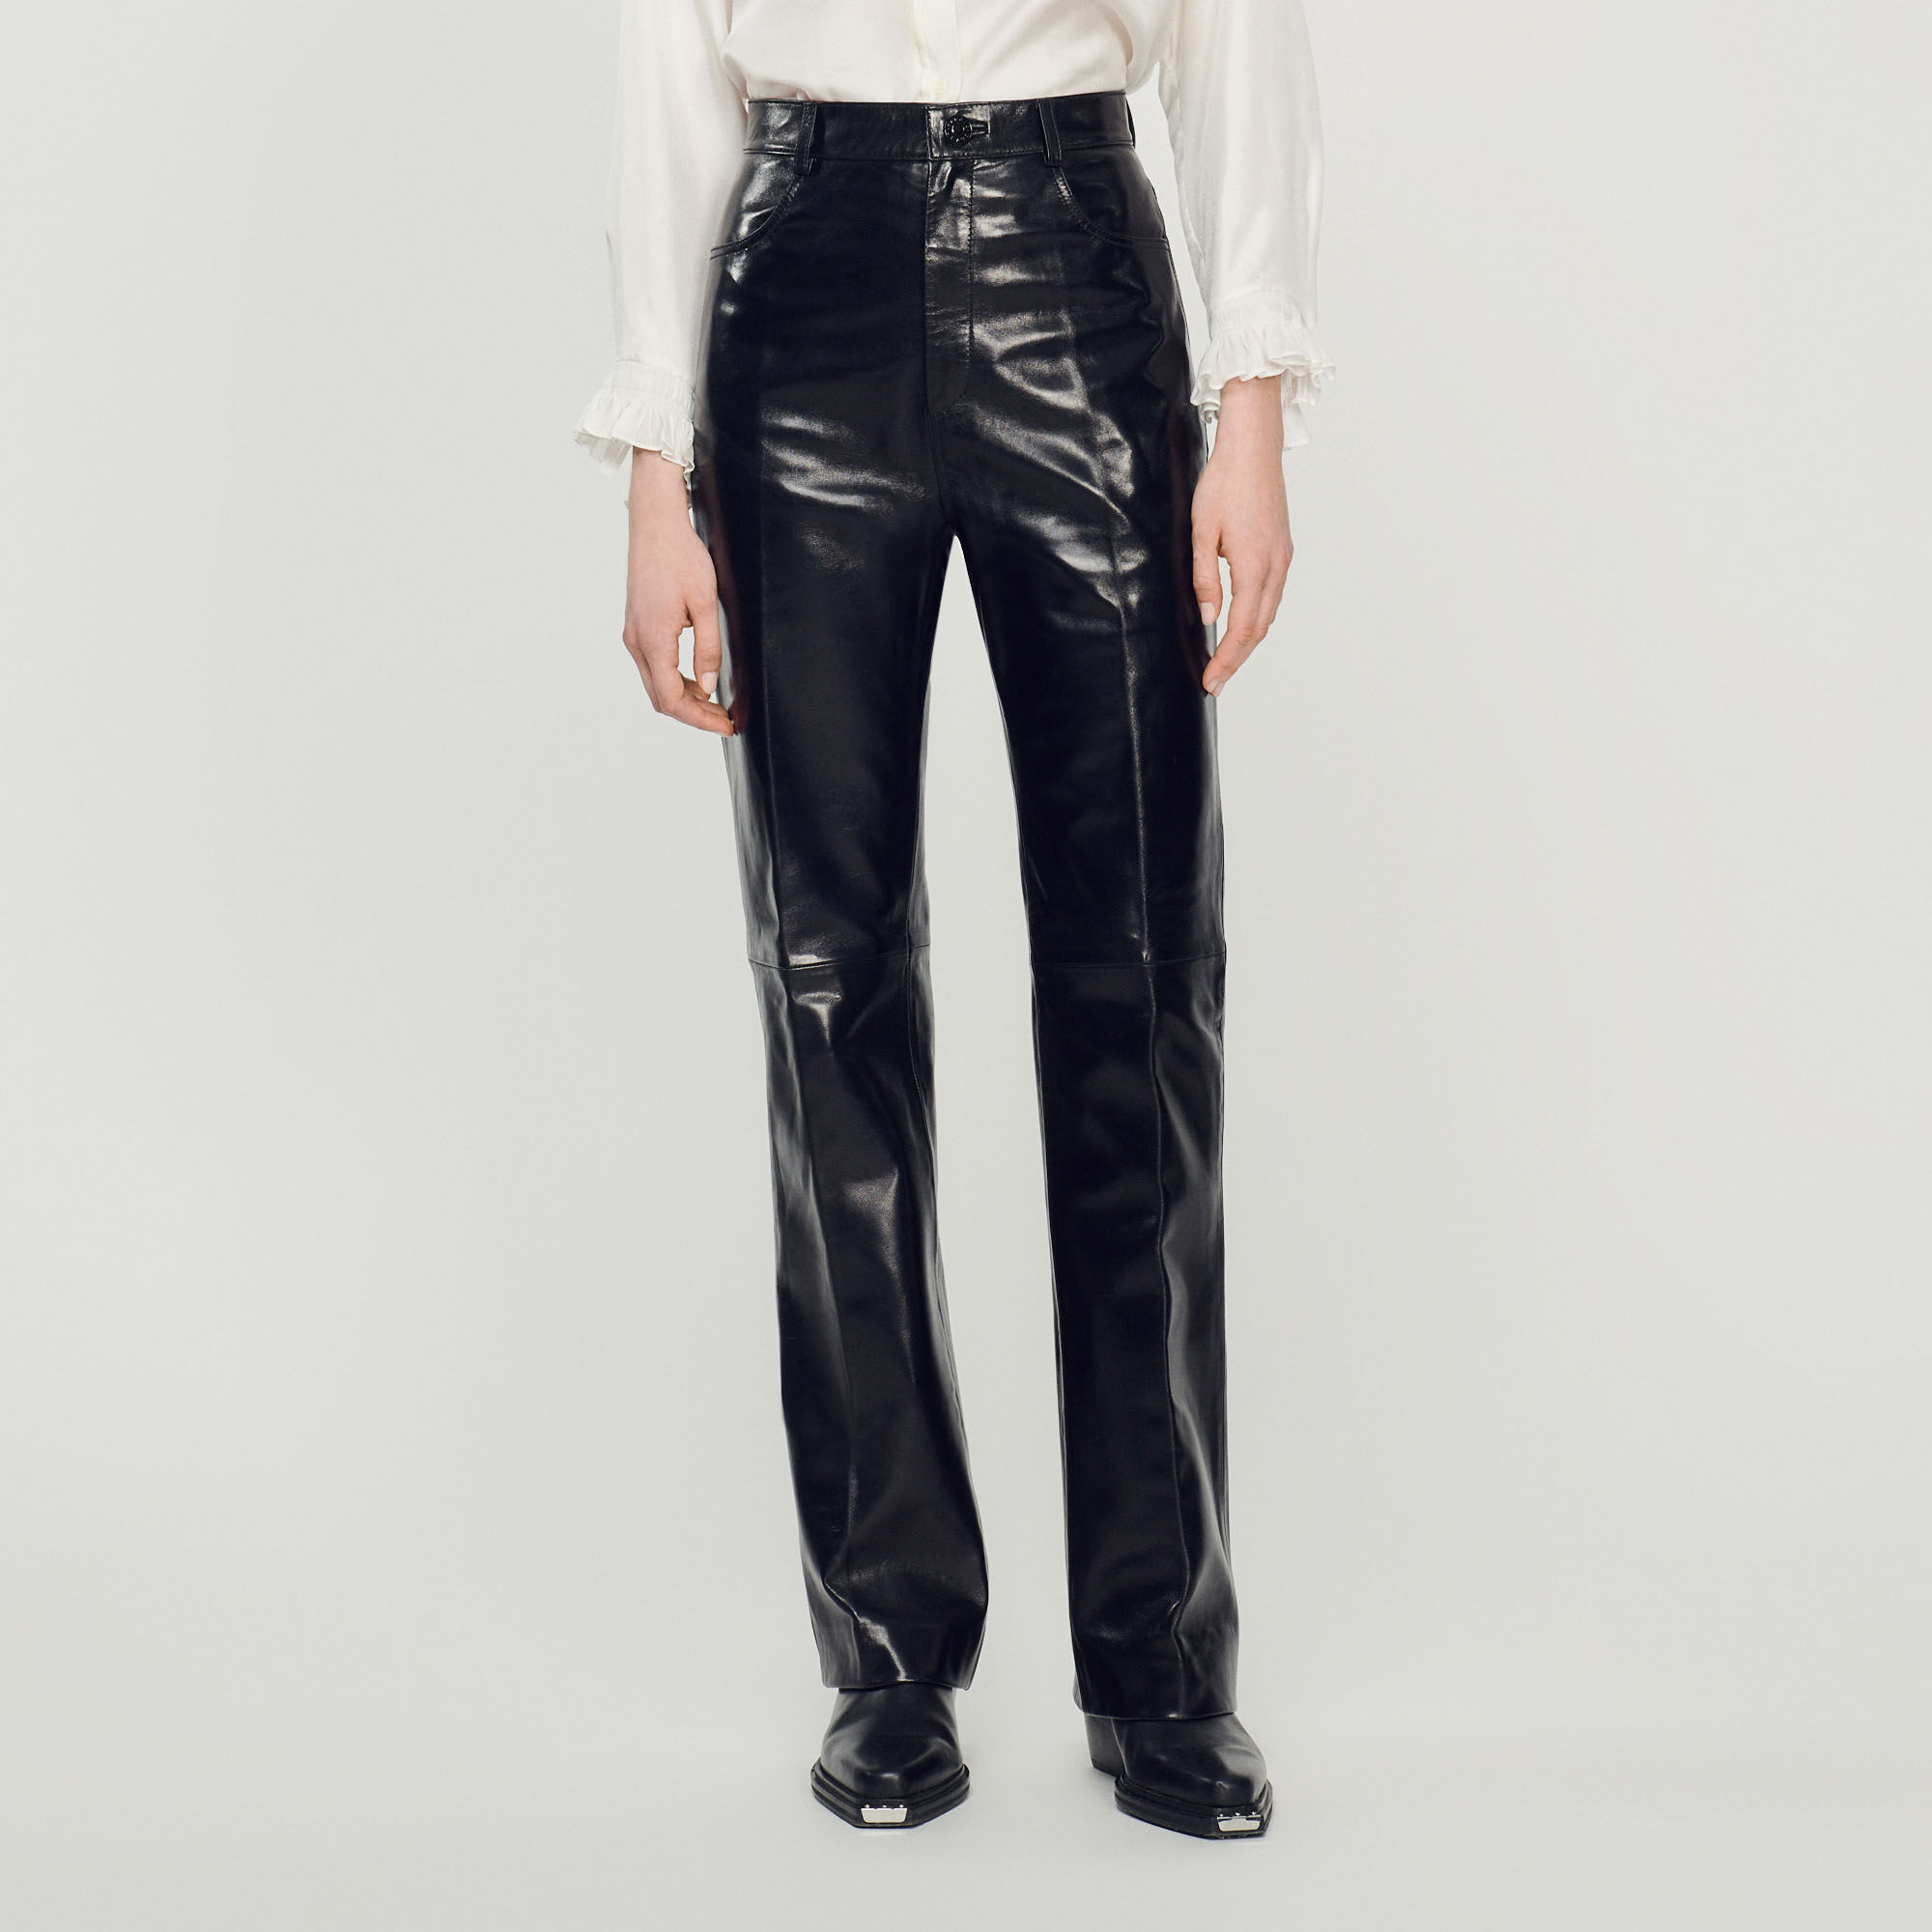 AGOLDE Recycled Leather Lyle Low Rise Slim in Detox | REVOLVE